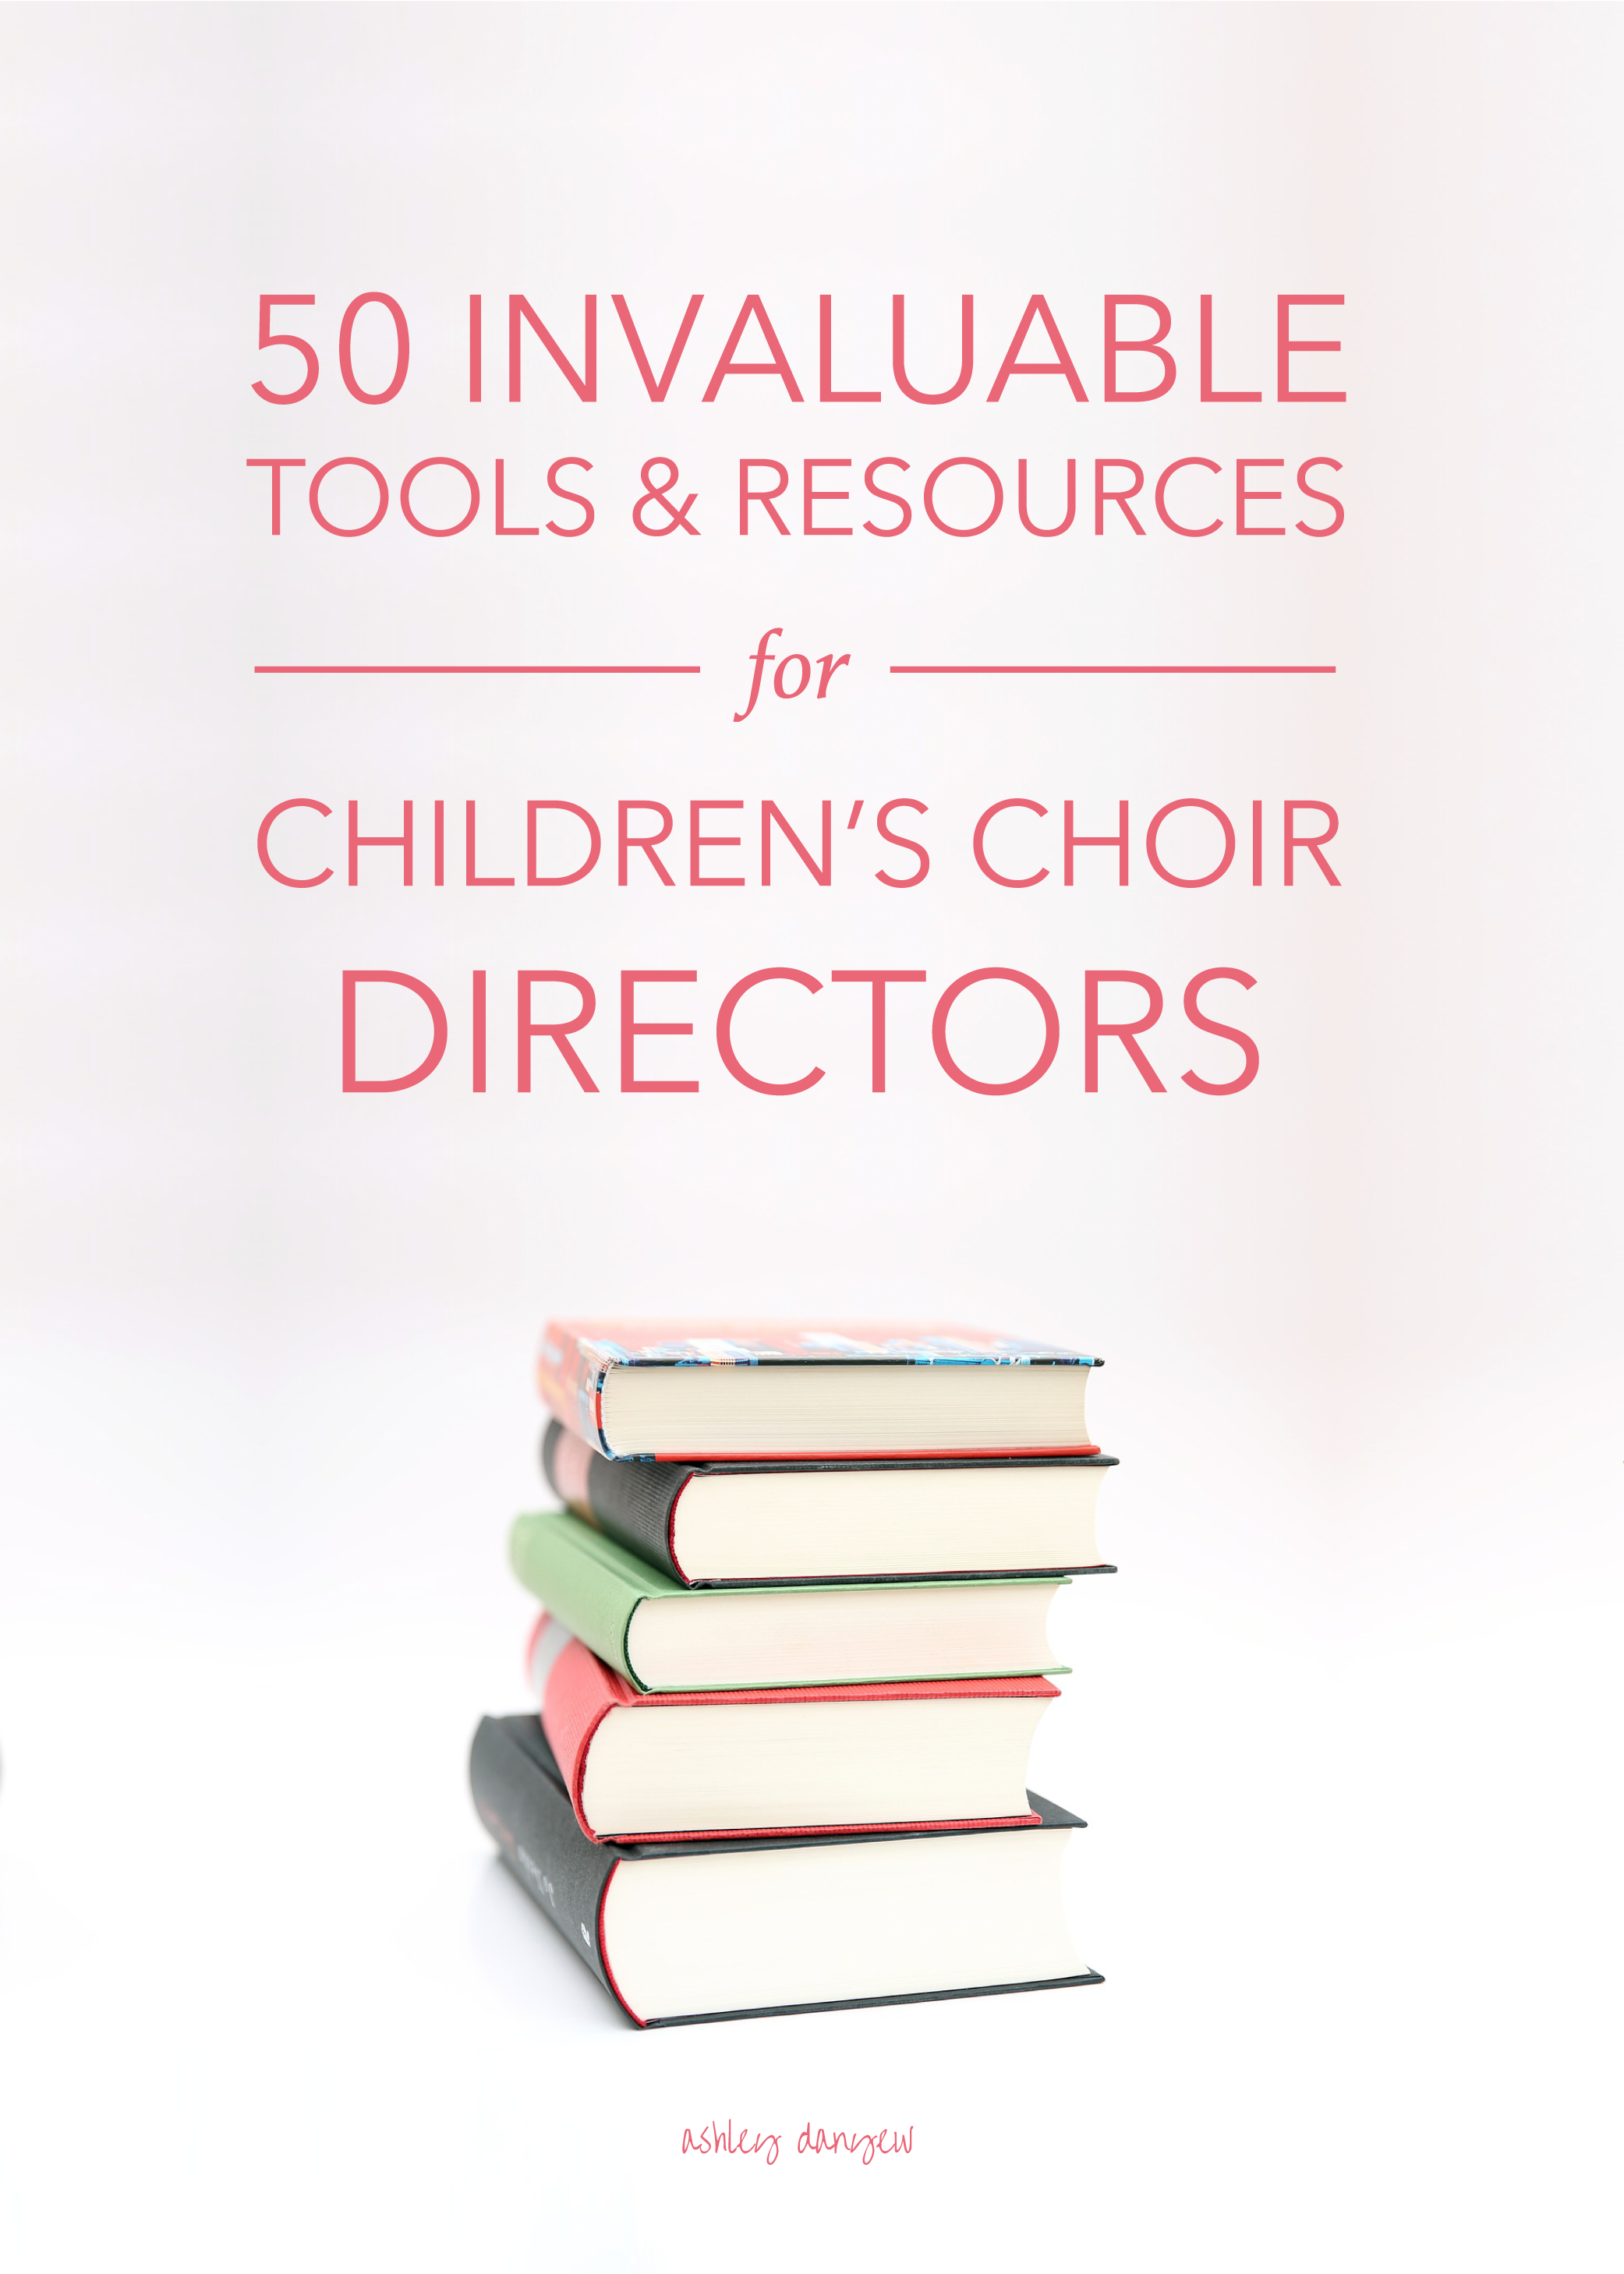 50 Invaluable Tools and Resources for Children's Choir Directors-01.png